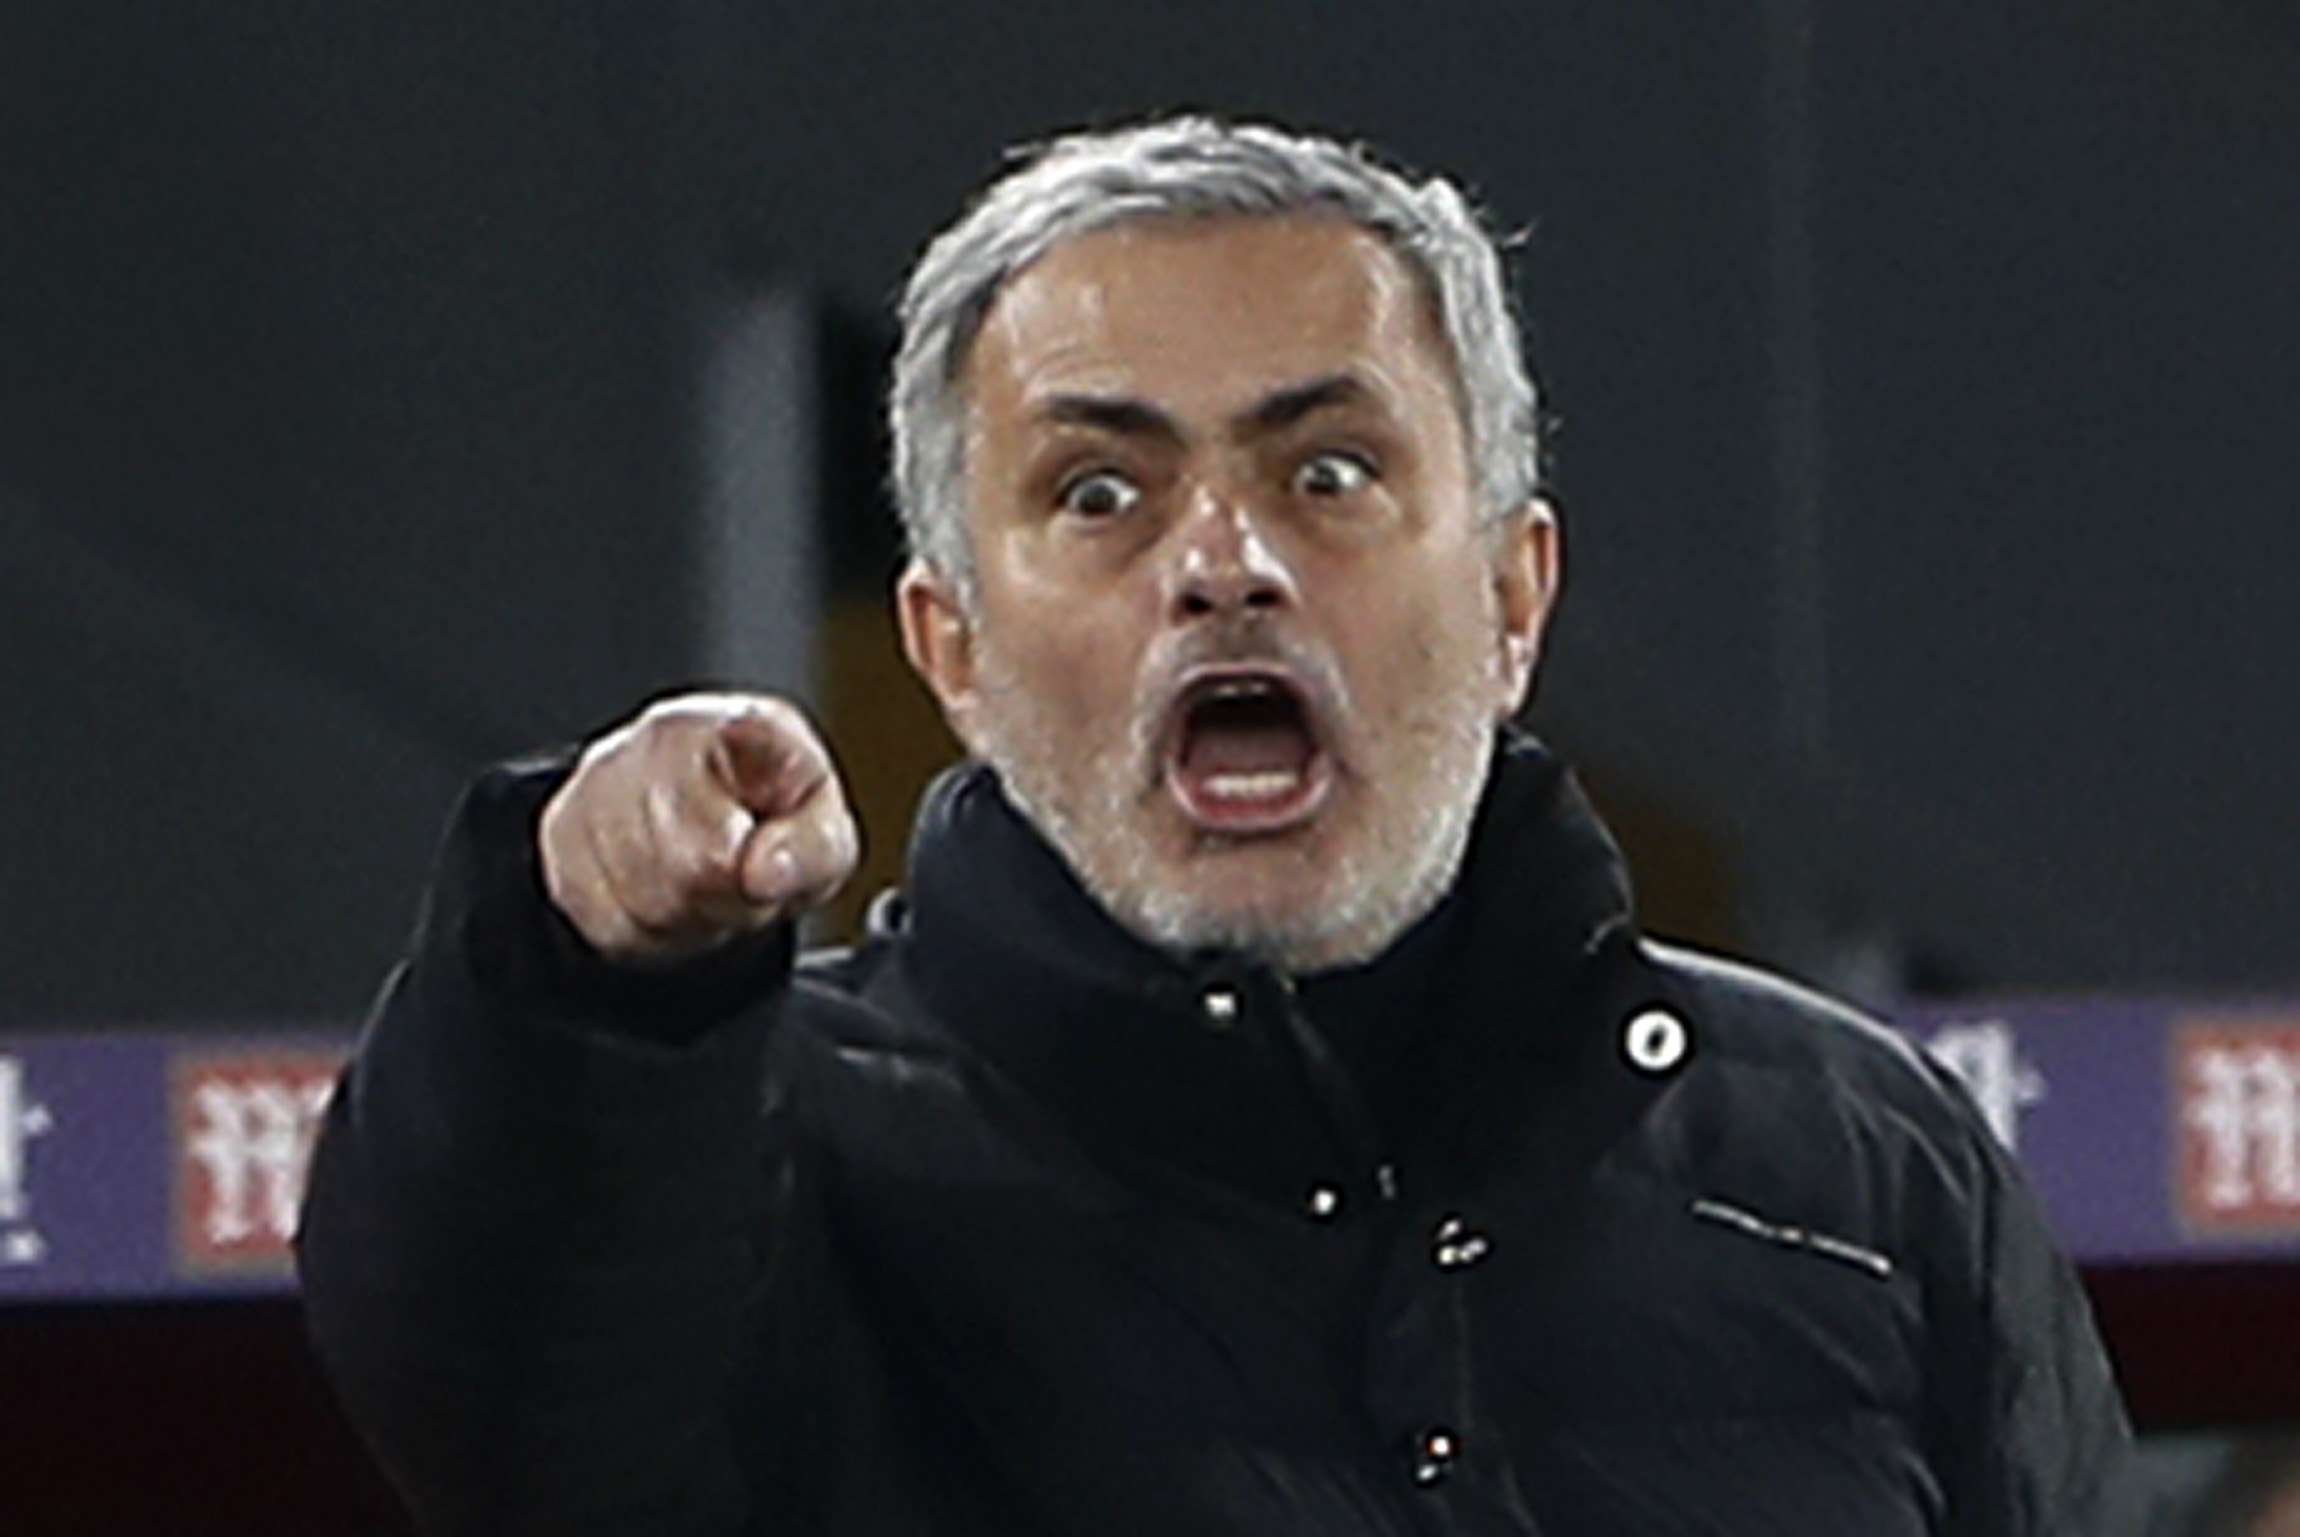 Jose Mourinho’ s reign at Manchester United isn’t something to shout about as the Red Devils continue to struggle in the Premiership. Photo: Reuters